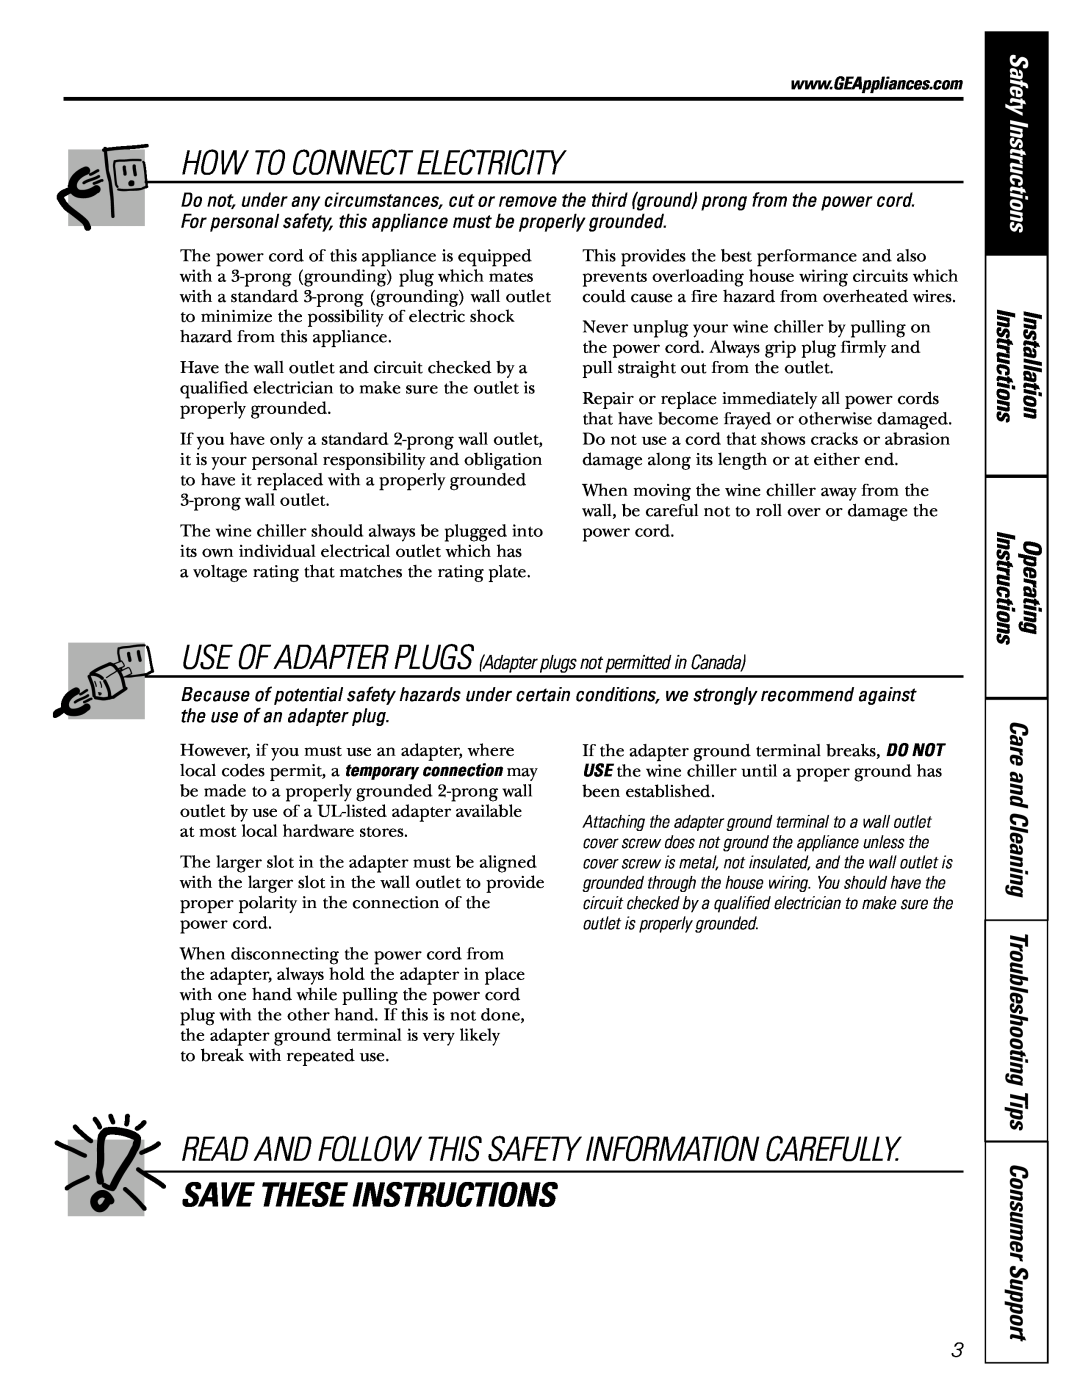 GE Wine Chiller How To Connect Electricity, Read And Follow This Safety Information Carefully, Save These Instructions 